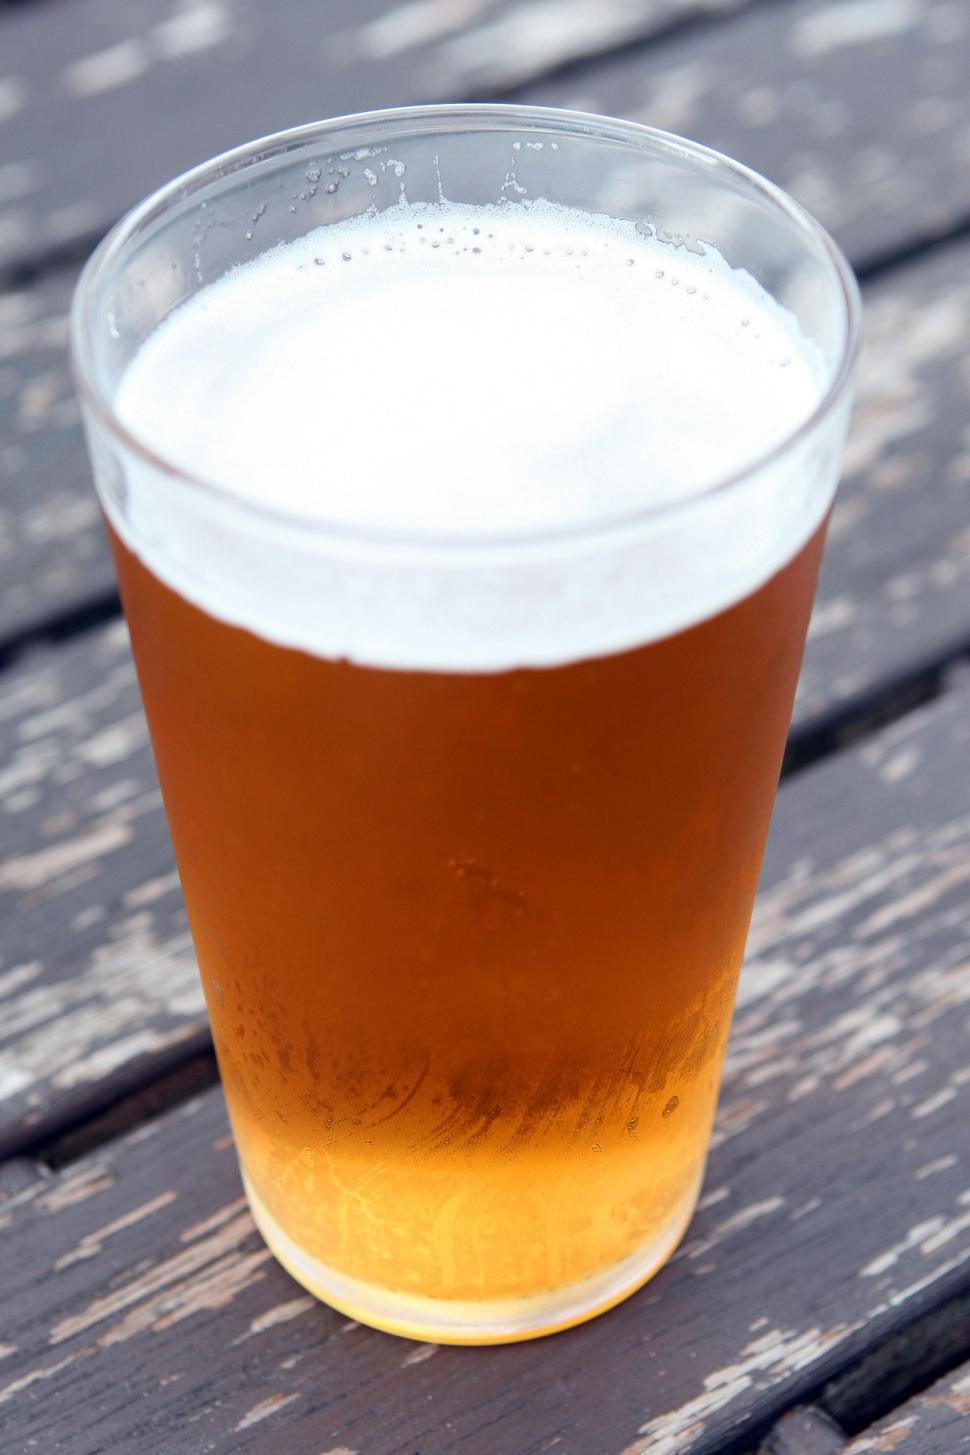 Free Image of Glass of Beer on Wooden Table 